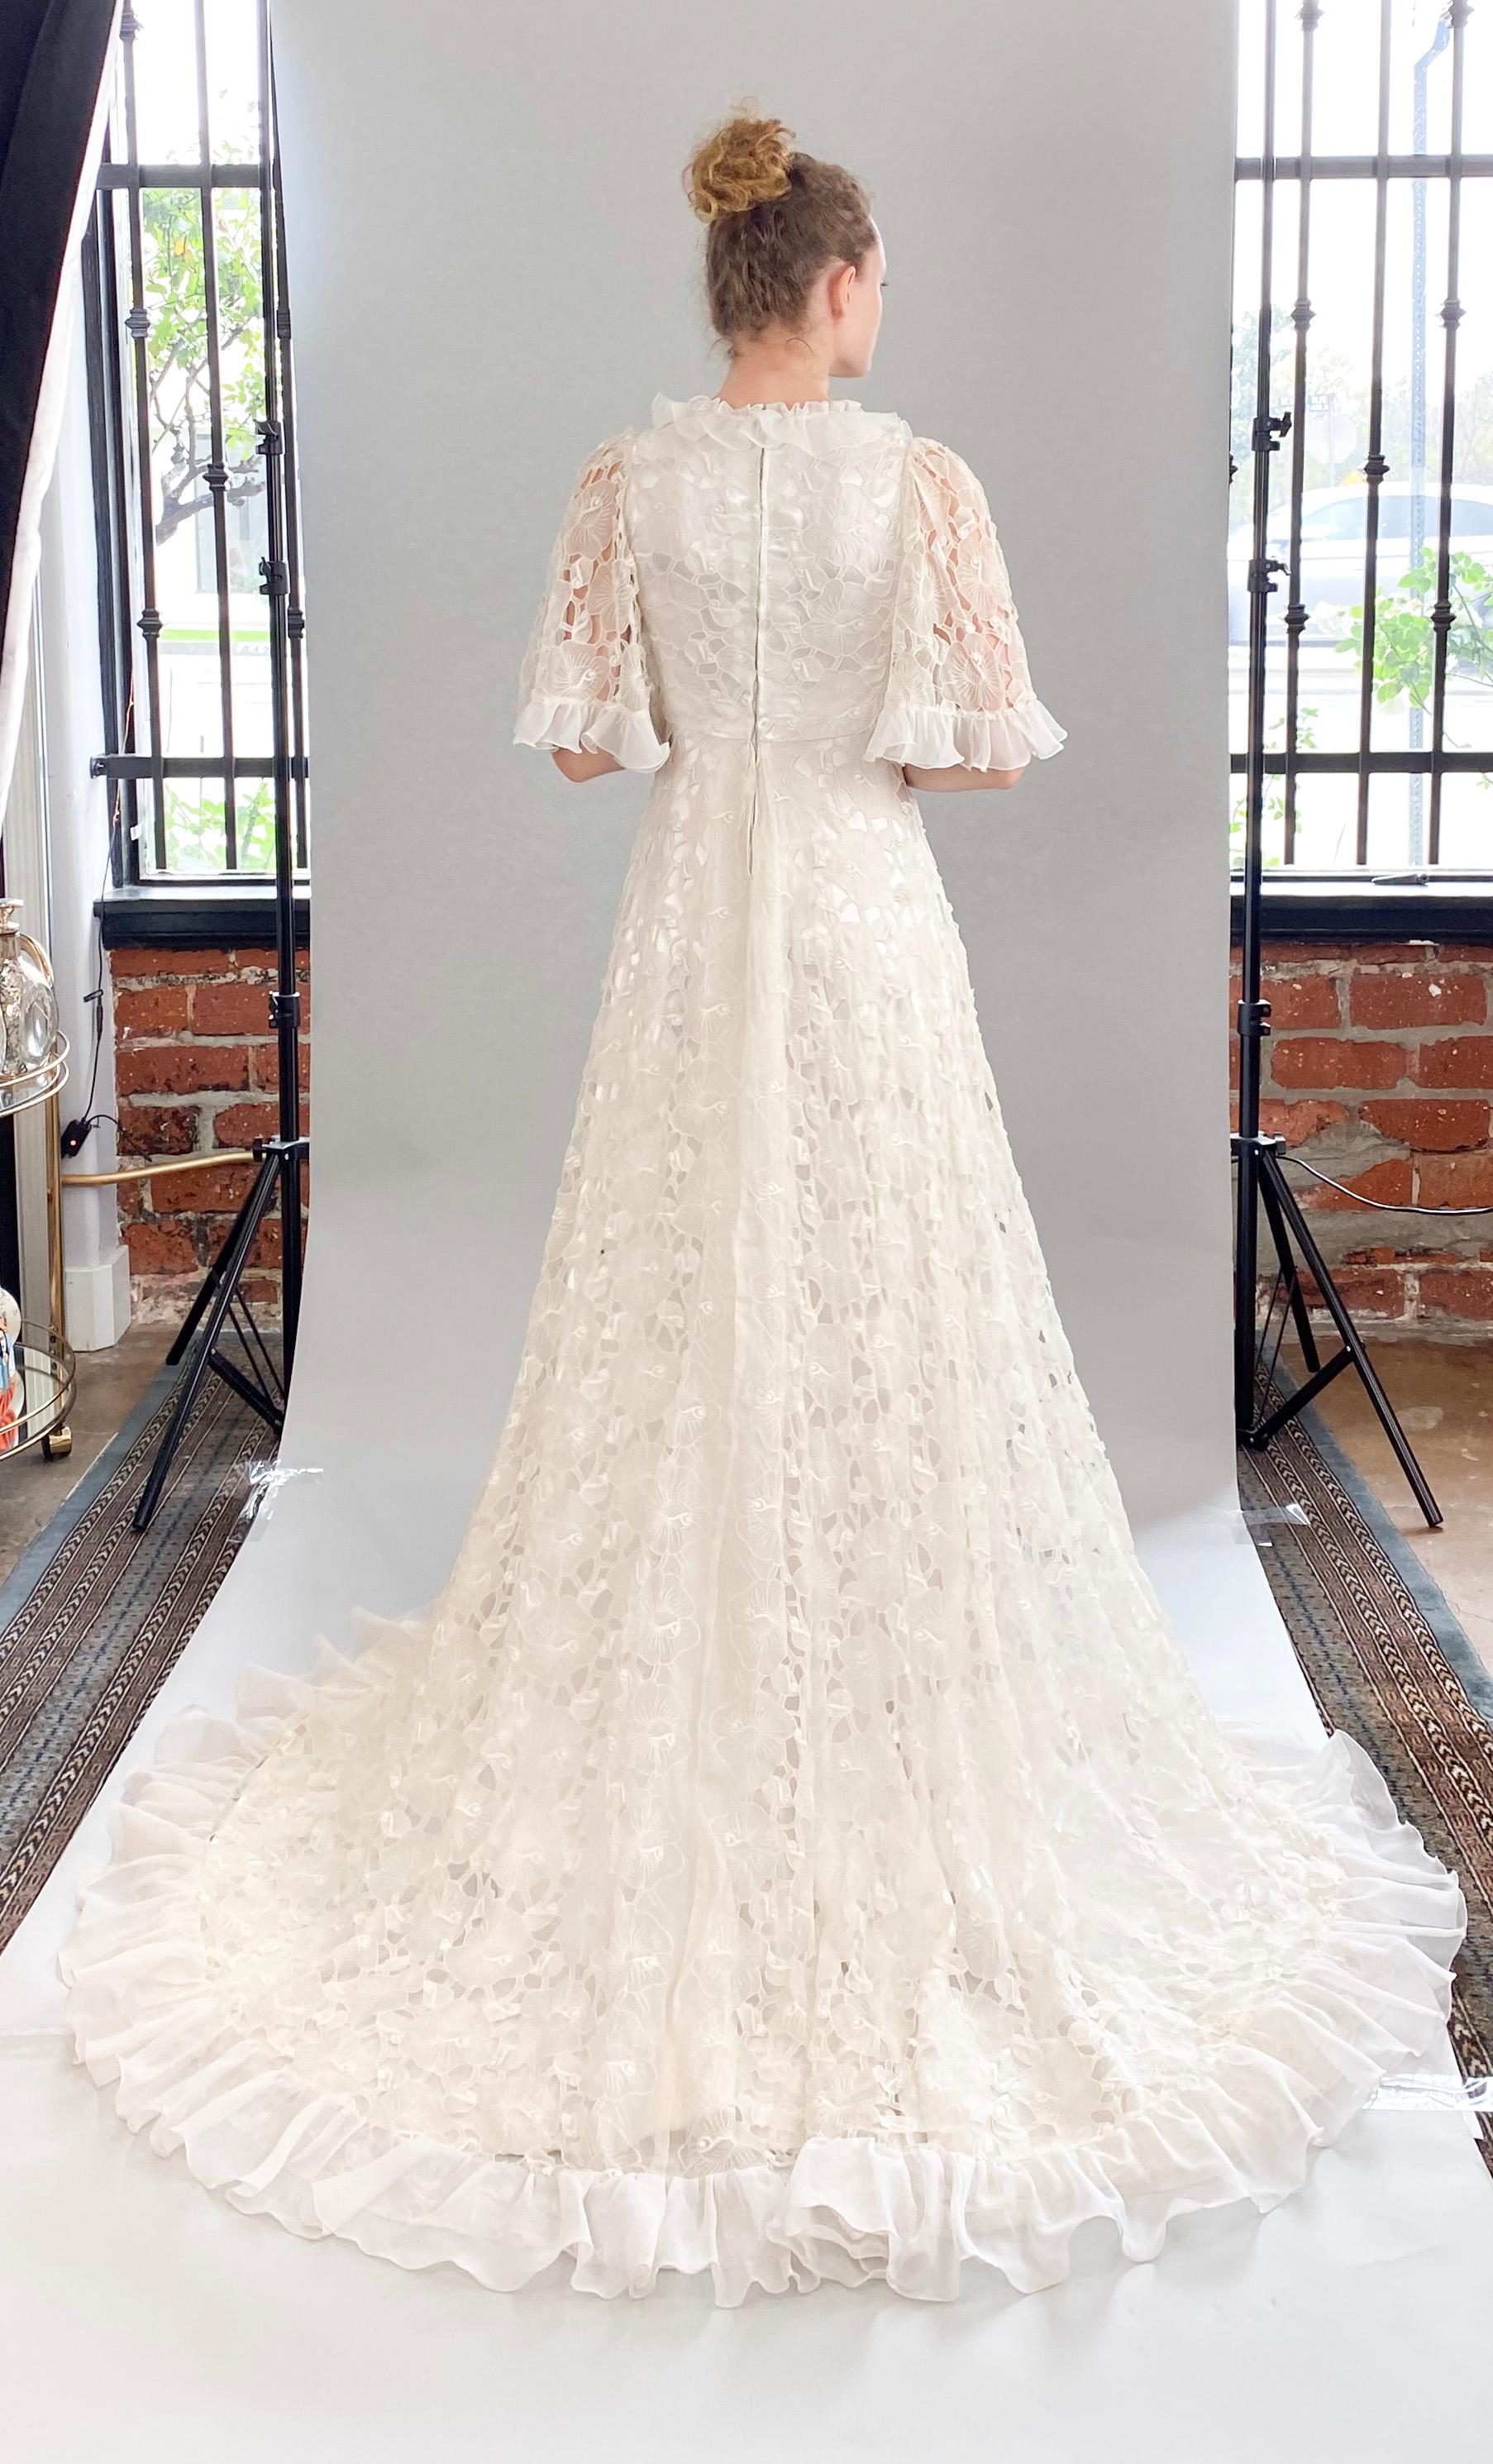 Indulge in sophistication and luxury with our White Lace Silk Ruffle Wedding Gown. Crafted with vintage white lace, ruffle sleeves and collar, and delicate silk chiffon trim, this high-low gown exudes elegance and timeless charm. Perfect for the